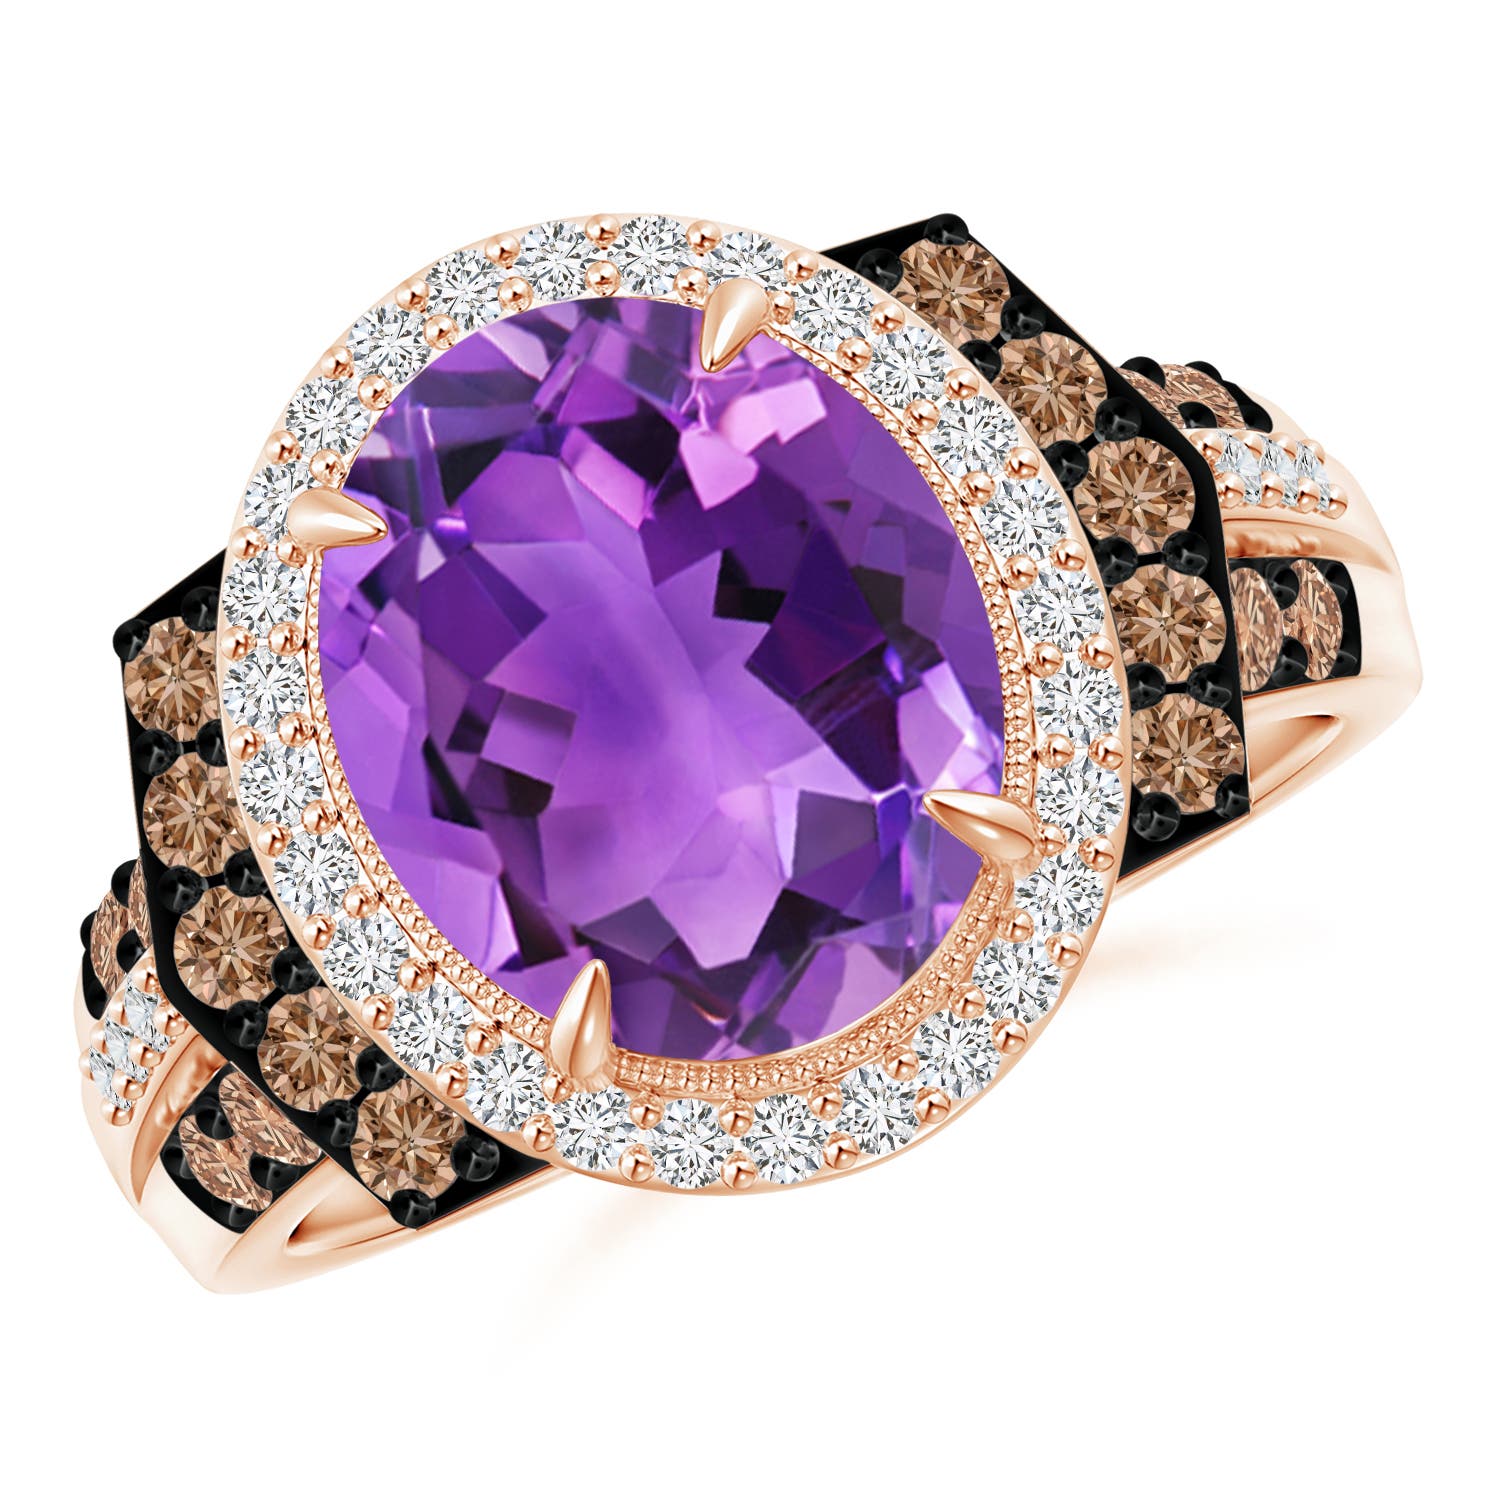 AAA - Amethyst / 3.8 CT / 14 KT Rose Gold